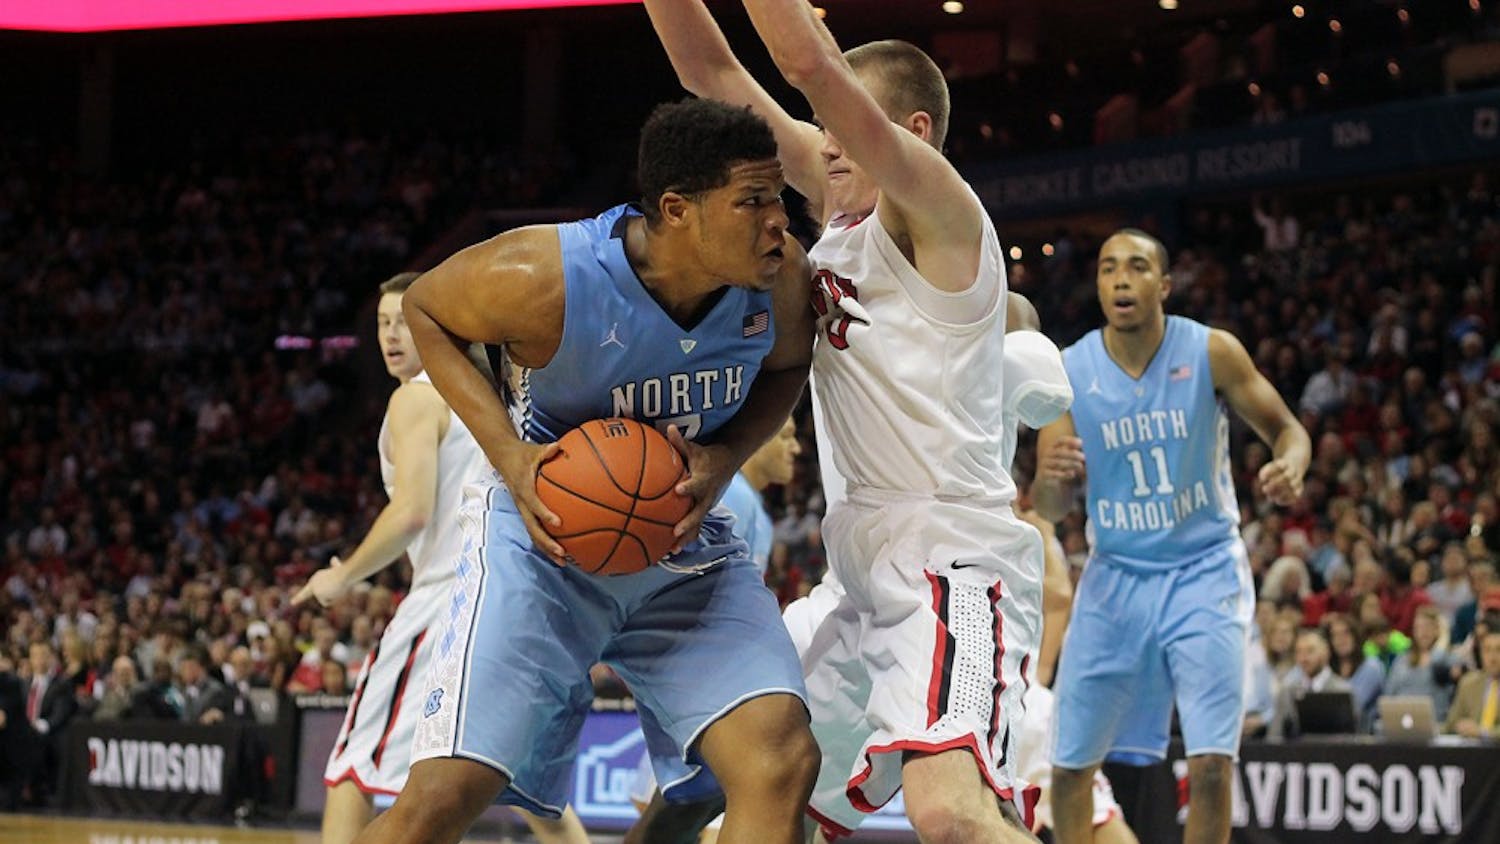 Sophomore Kennedy Meeks (3) led the team in rebounds, with 12 total for Saturday afternoon's game against Davidson.